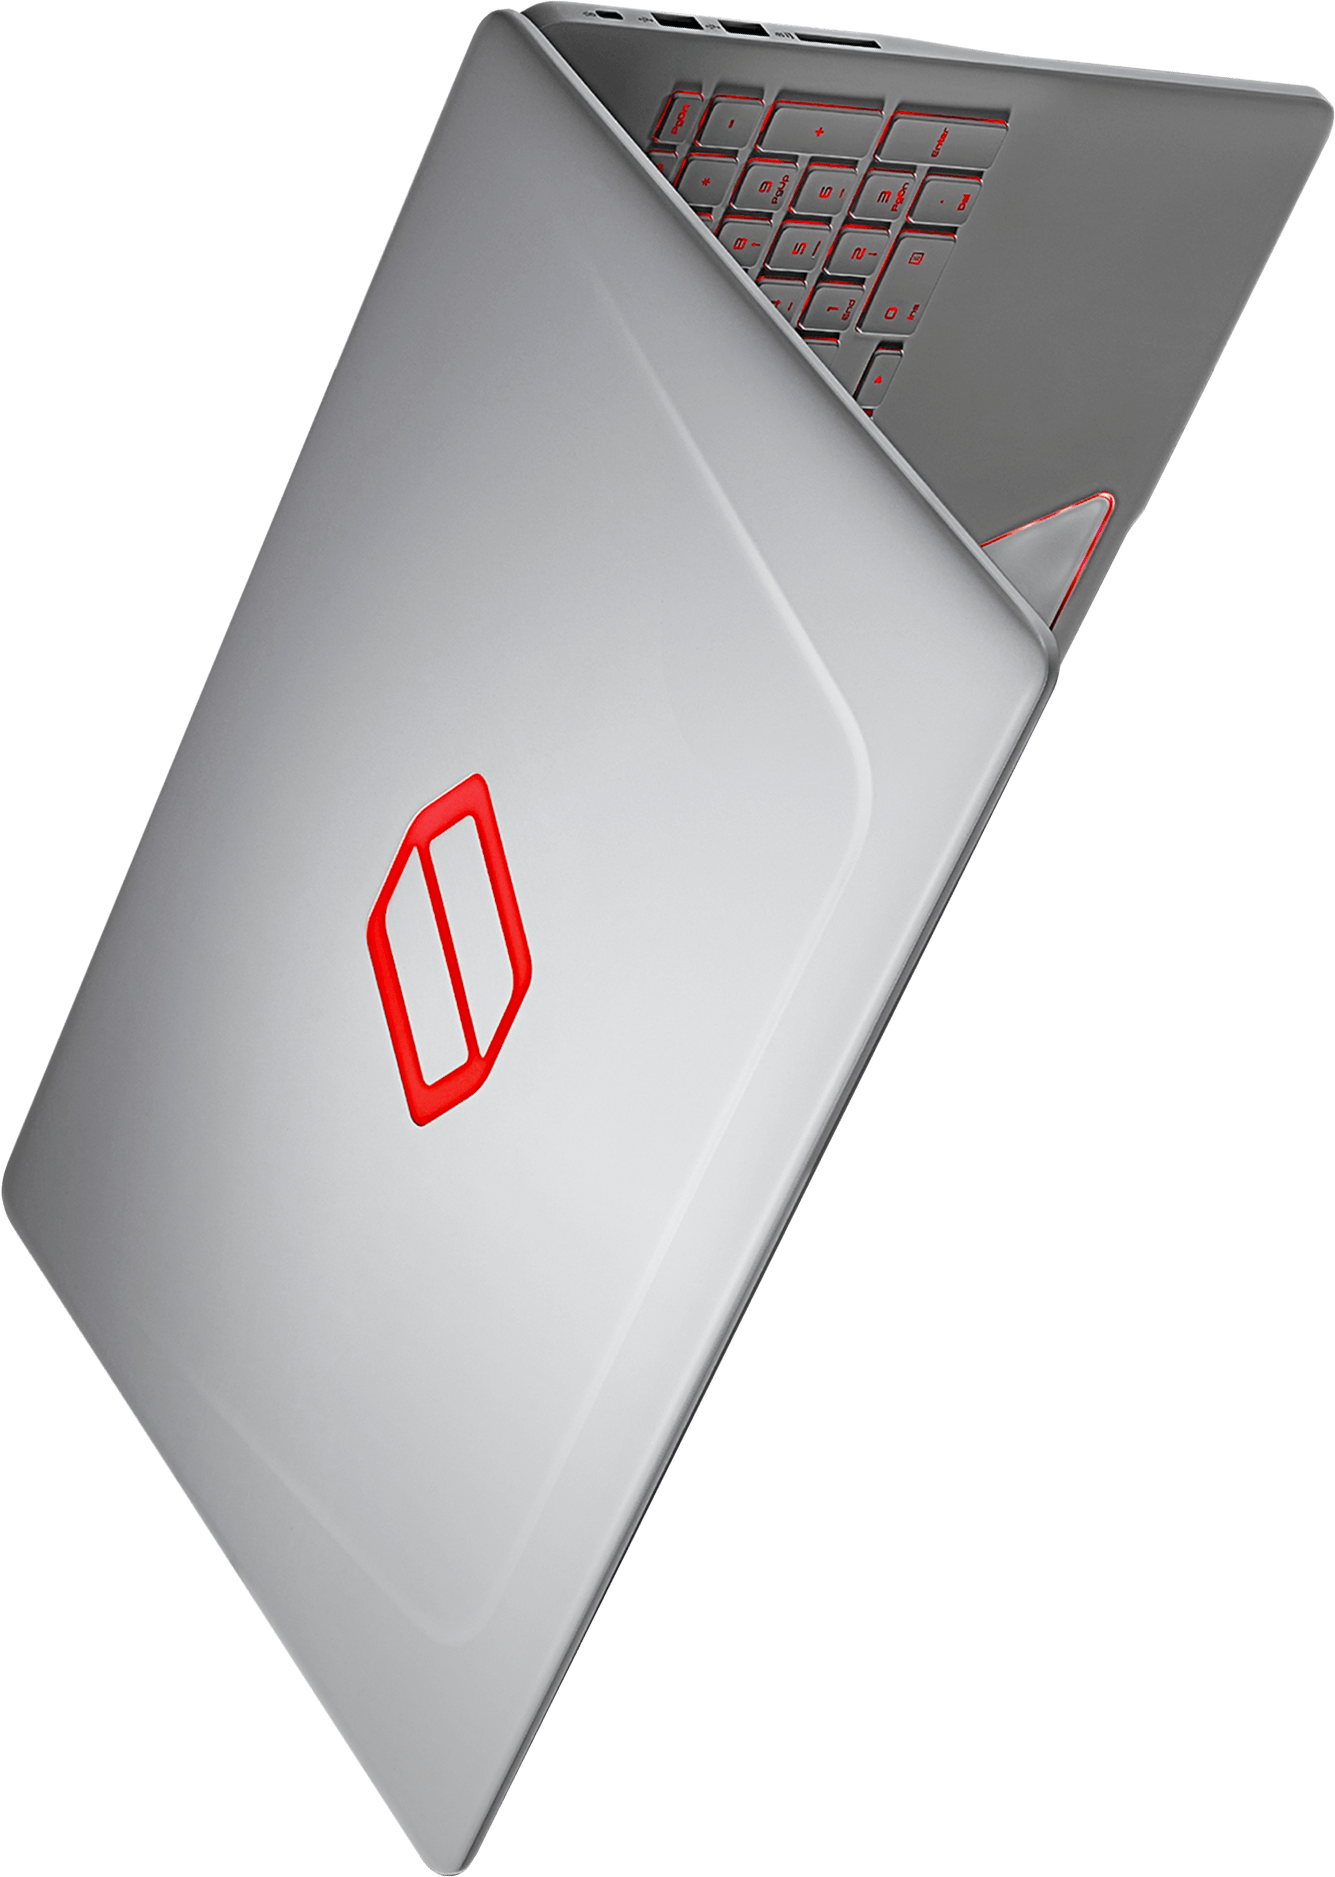 This is the image that shows Notebook Odyssey’s white product.